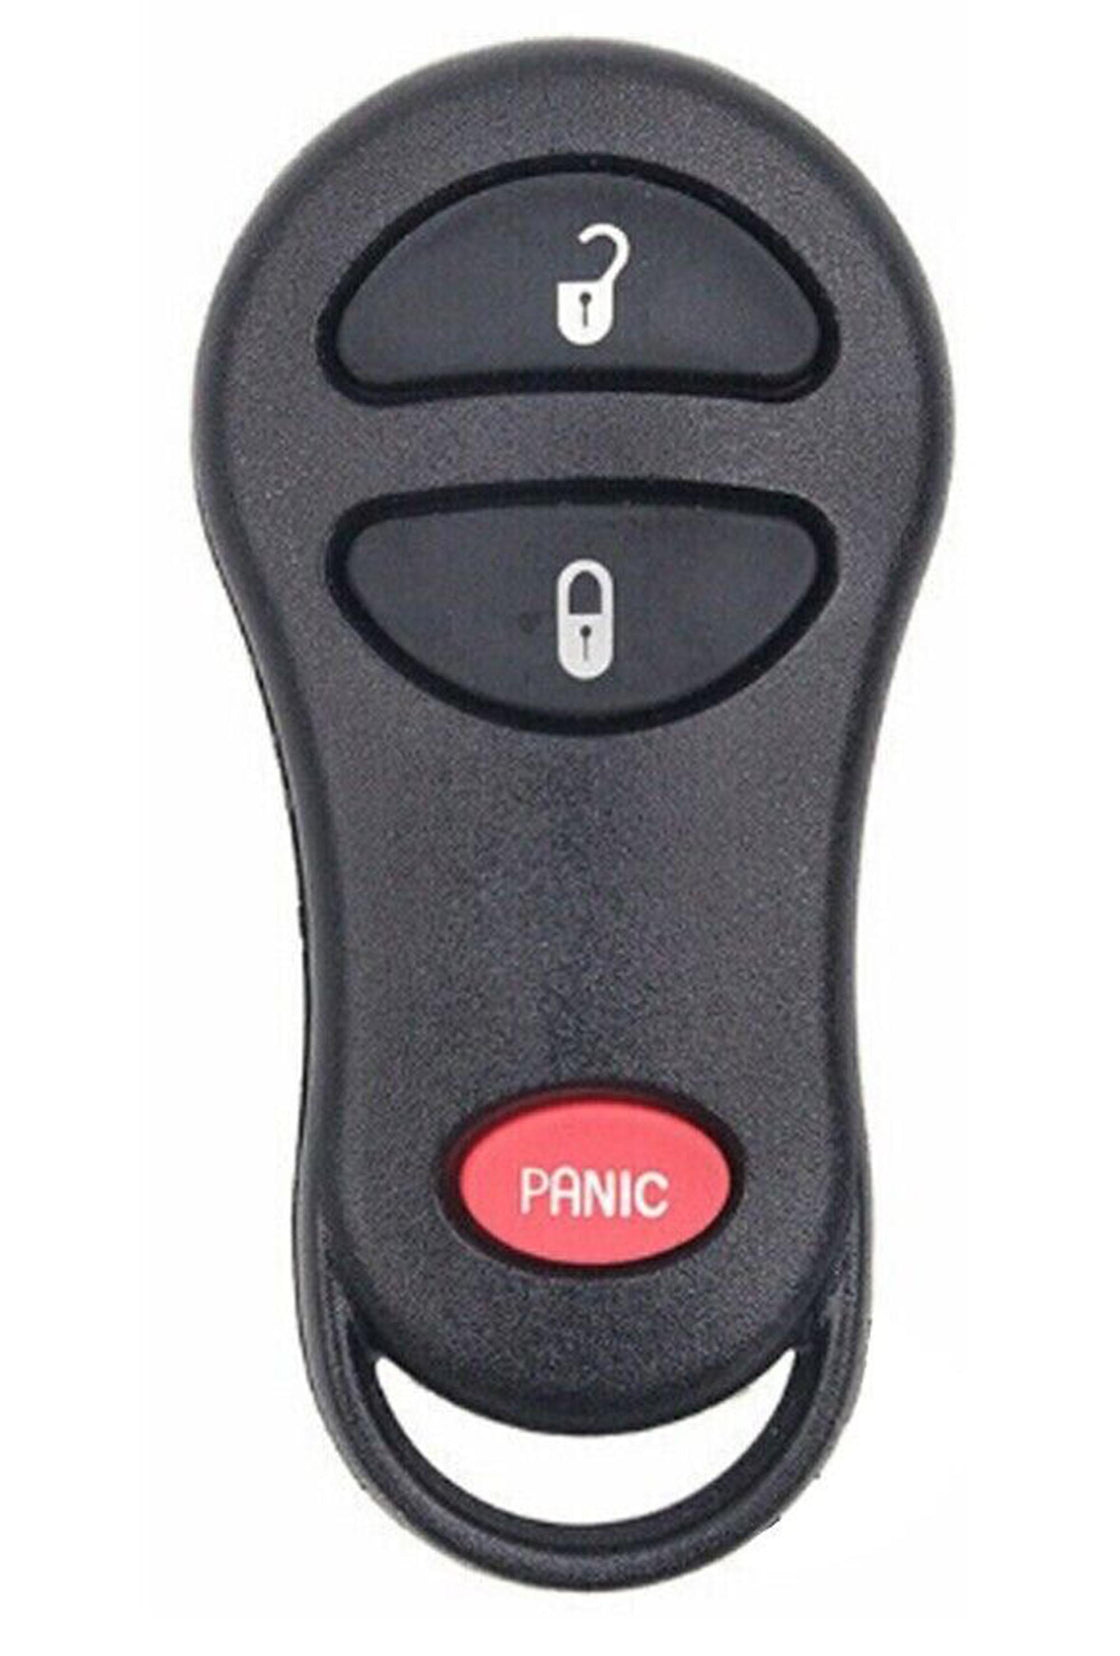 2001 Plymouth Prowler Replacement Key Fob Remote